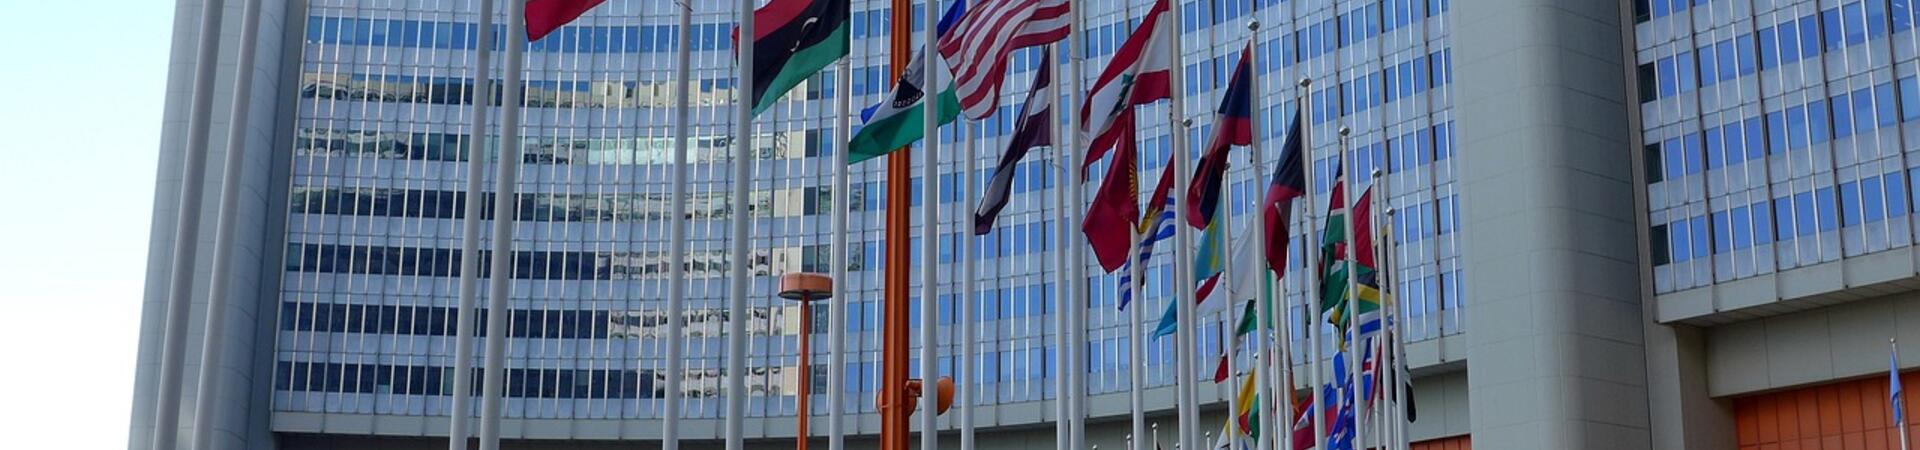 Image of building with flags